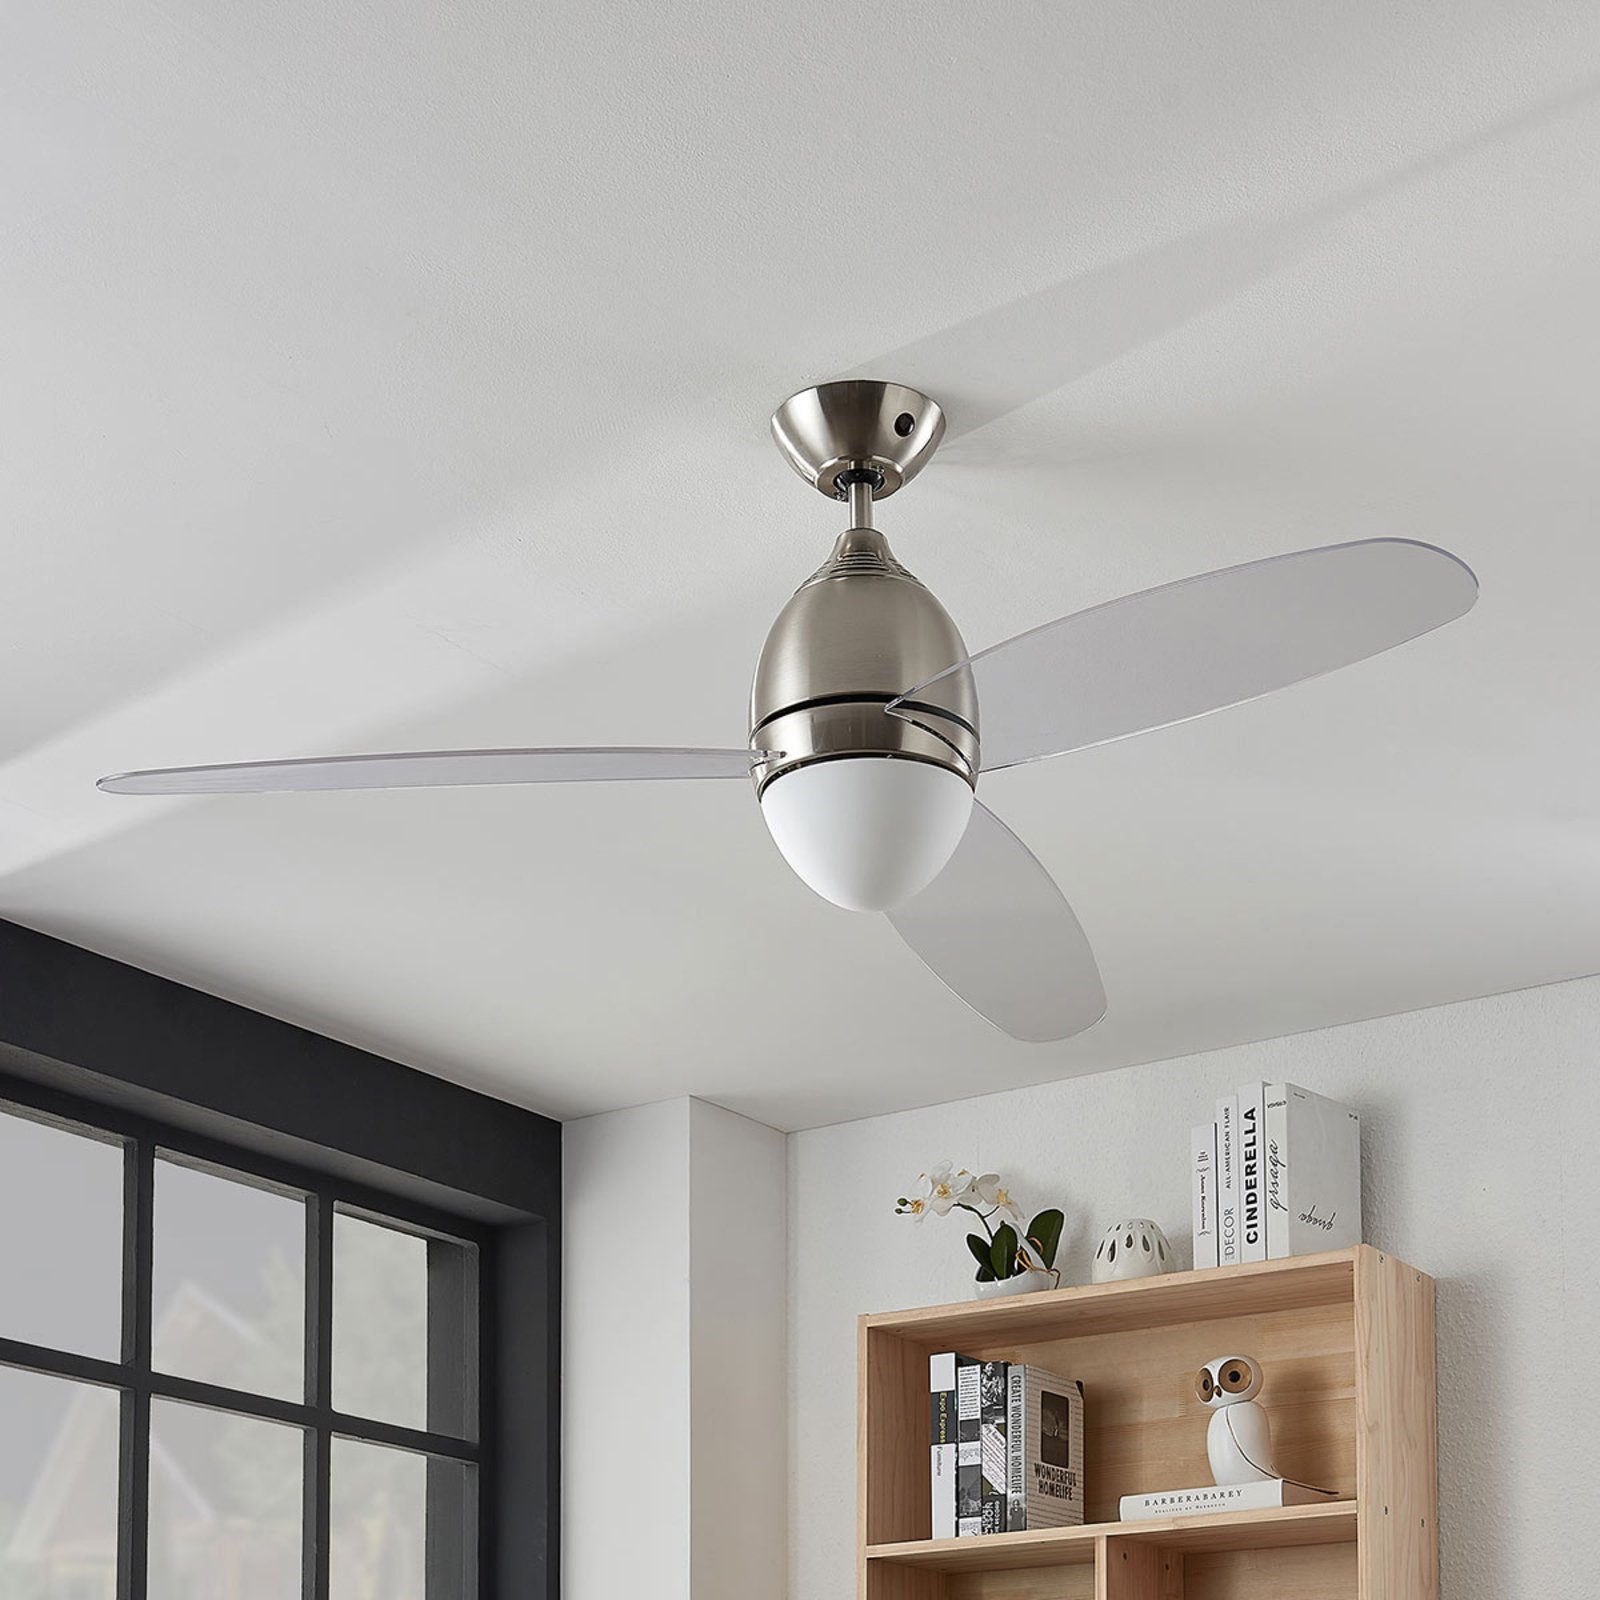 Piara ceiling fan with light, clear